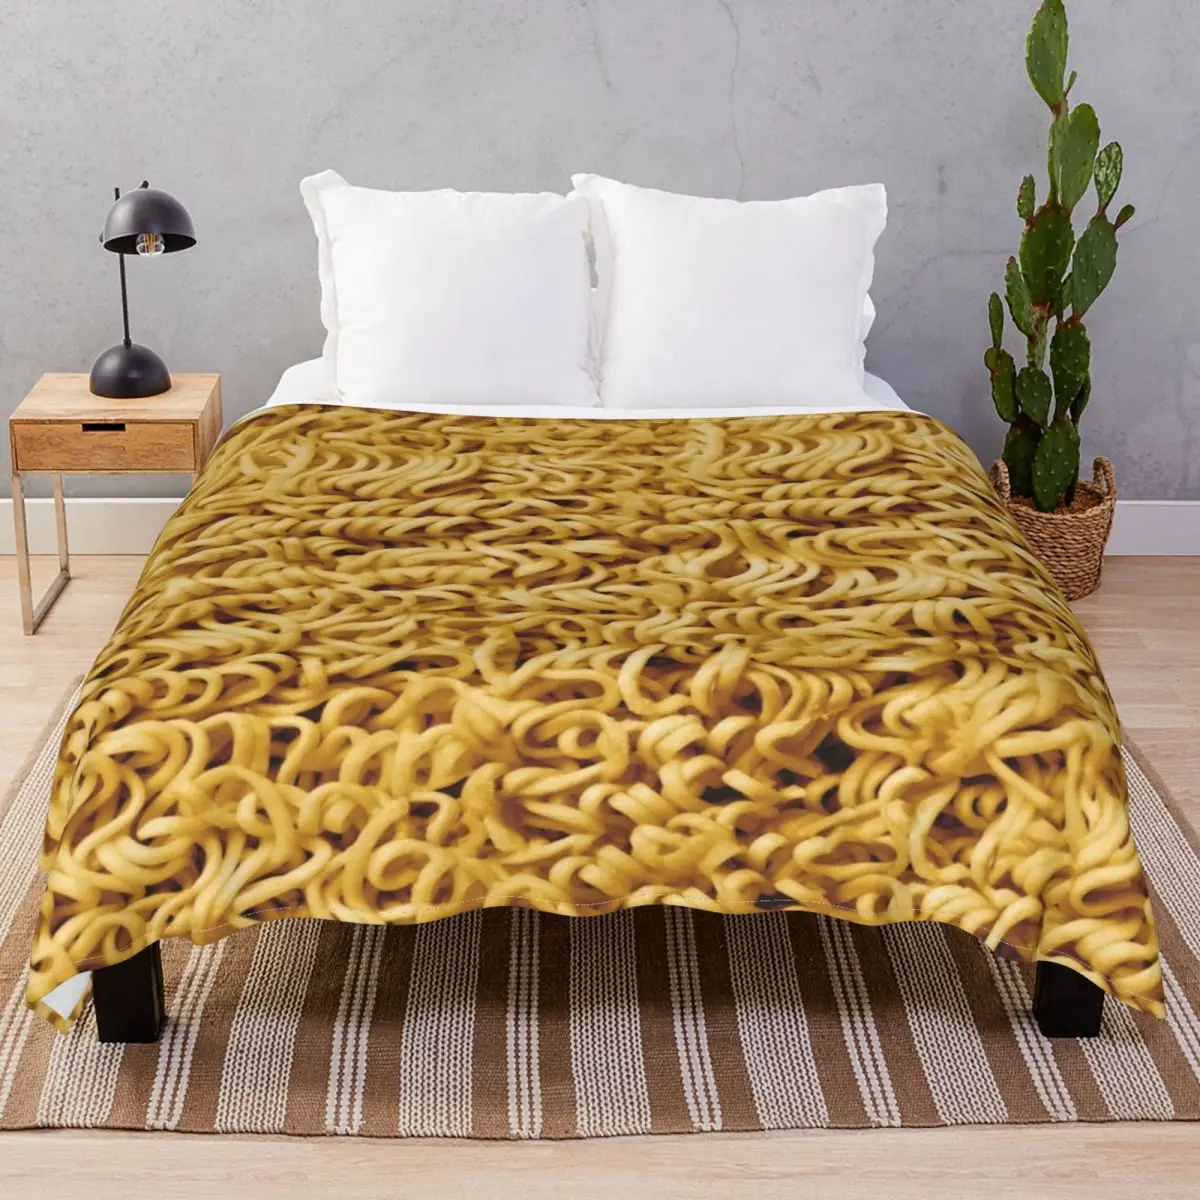 Seamless Ramen Noodle Blanket Fleece Spring Autumn Fluffy Throw Blankets for Bedding Home Couch Travel Office